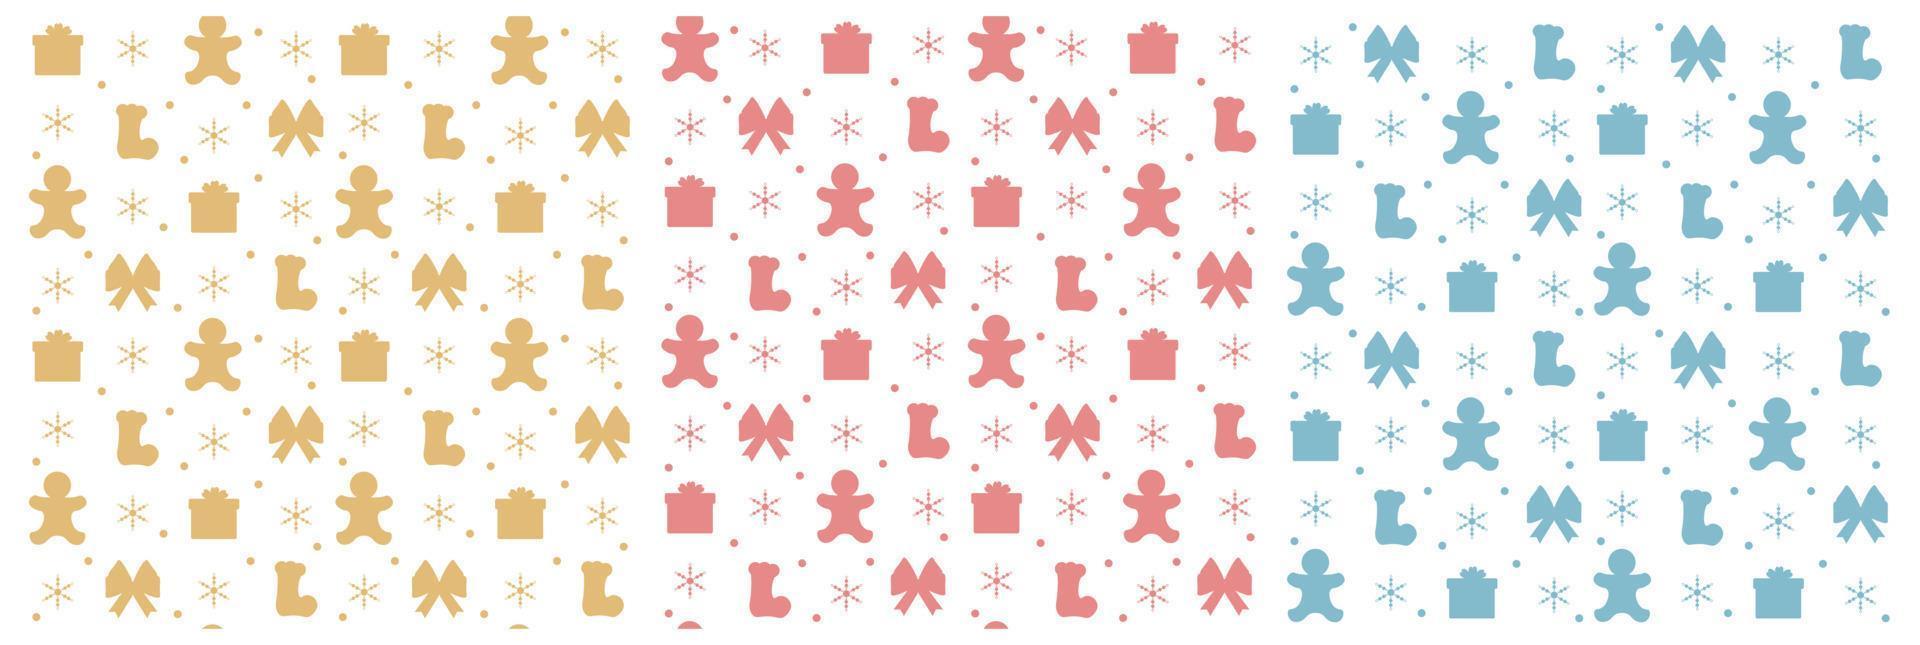 Christmas Background Seamless Pattern Design With Santa Claus, Tree, Snowman And Gifts in Template Hand Drawn Cartoon Flat Illustration vector